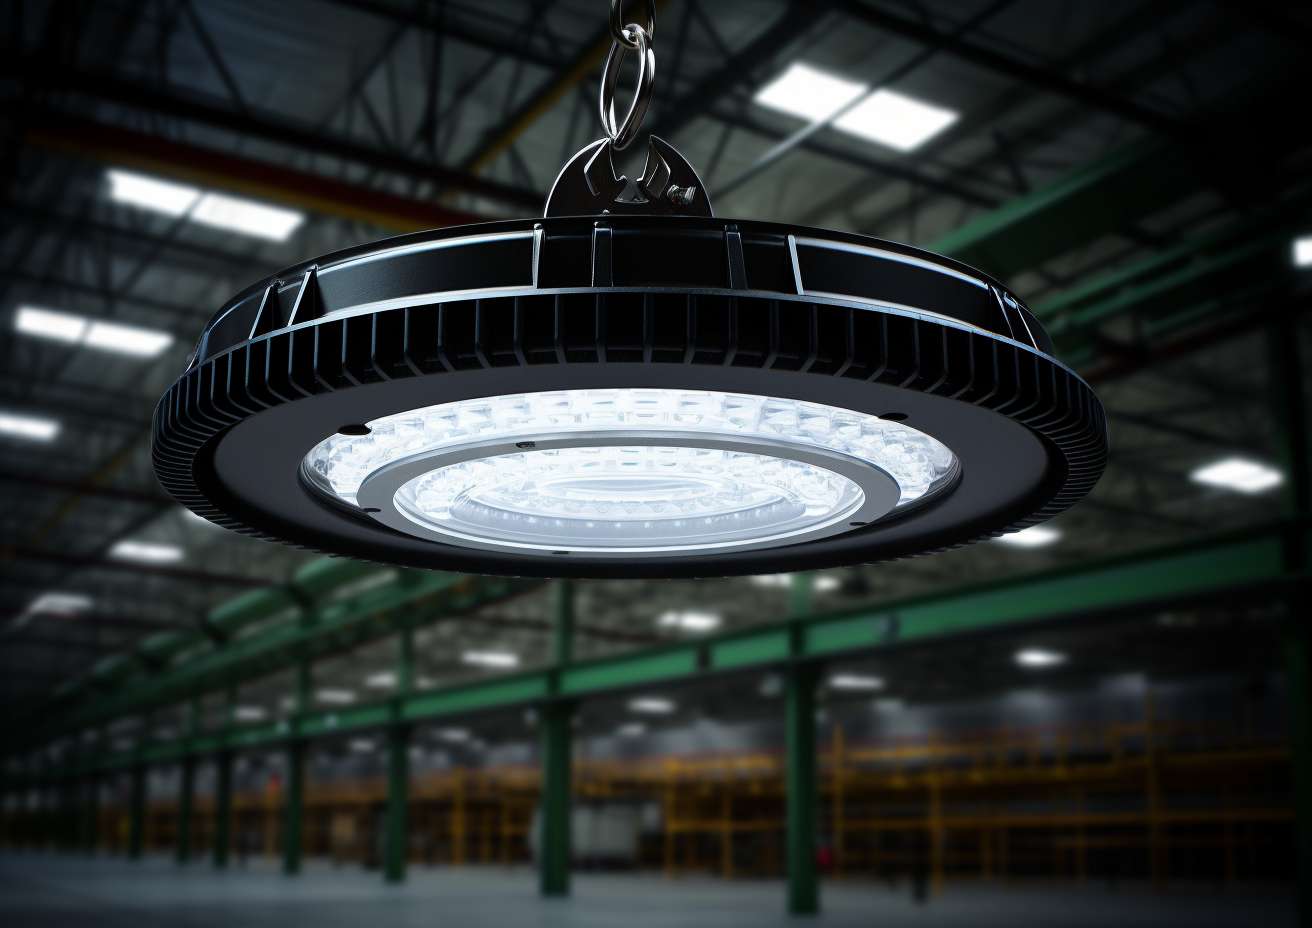 An industrial lighting fixture hanging in a warehouse.